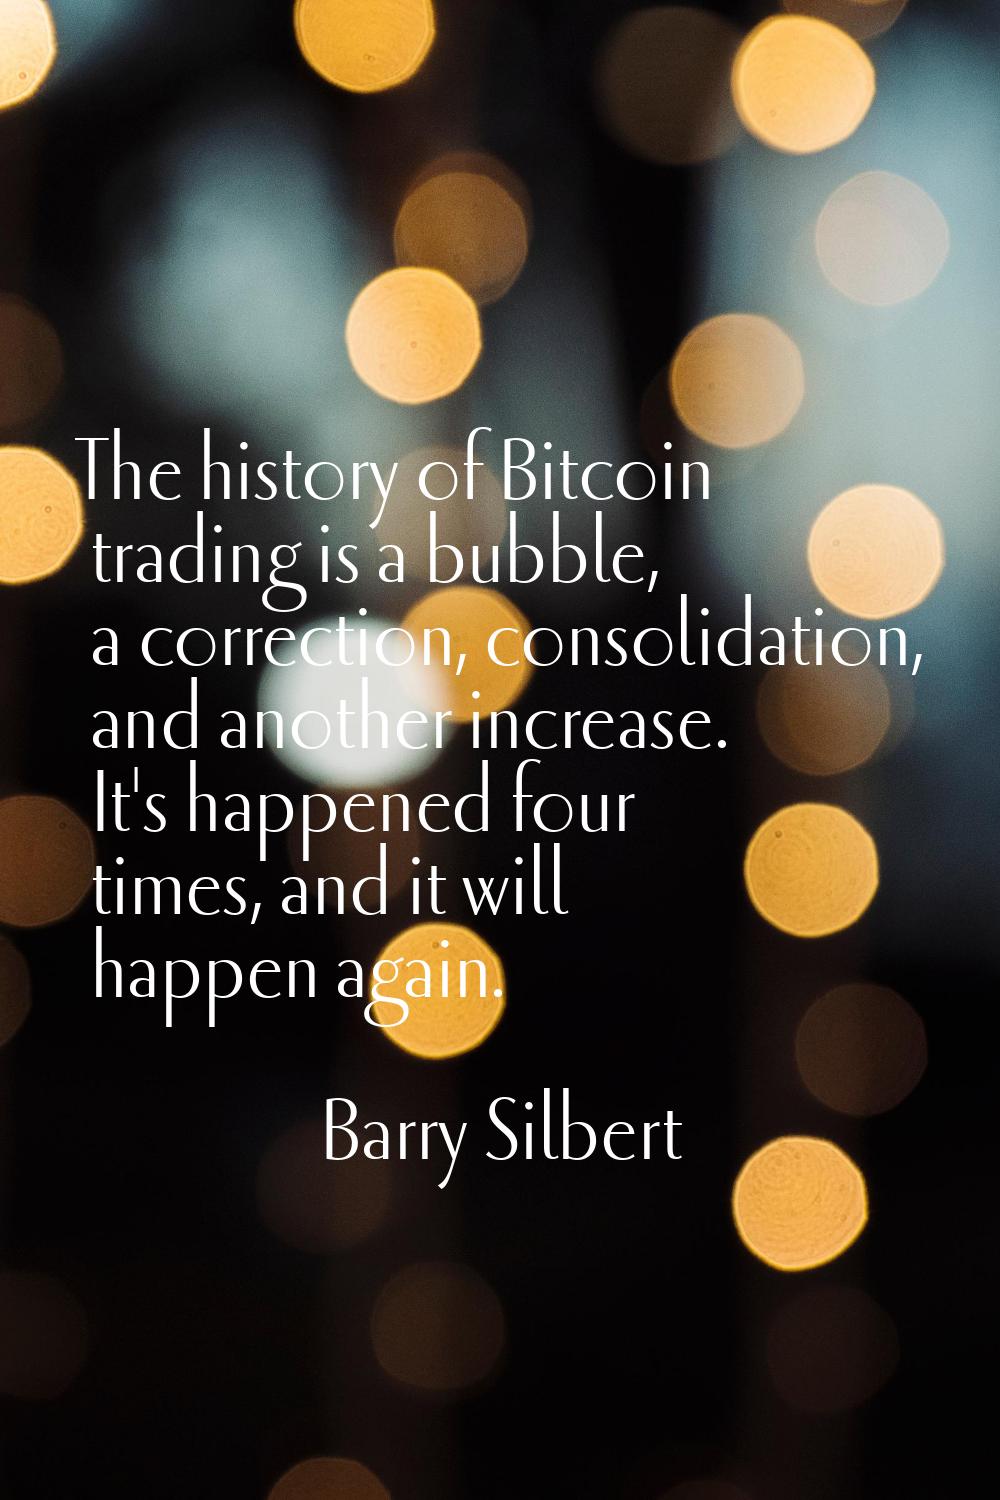 The history of Bitcoin trading is a bubble, a correction, consolidation, and another increase. It's